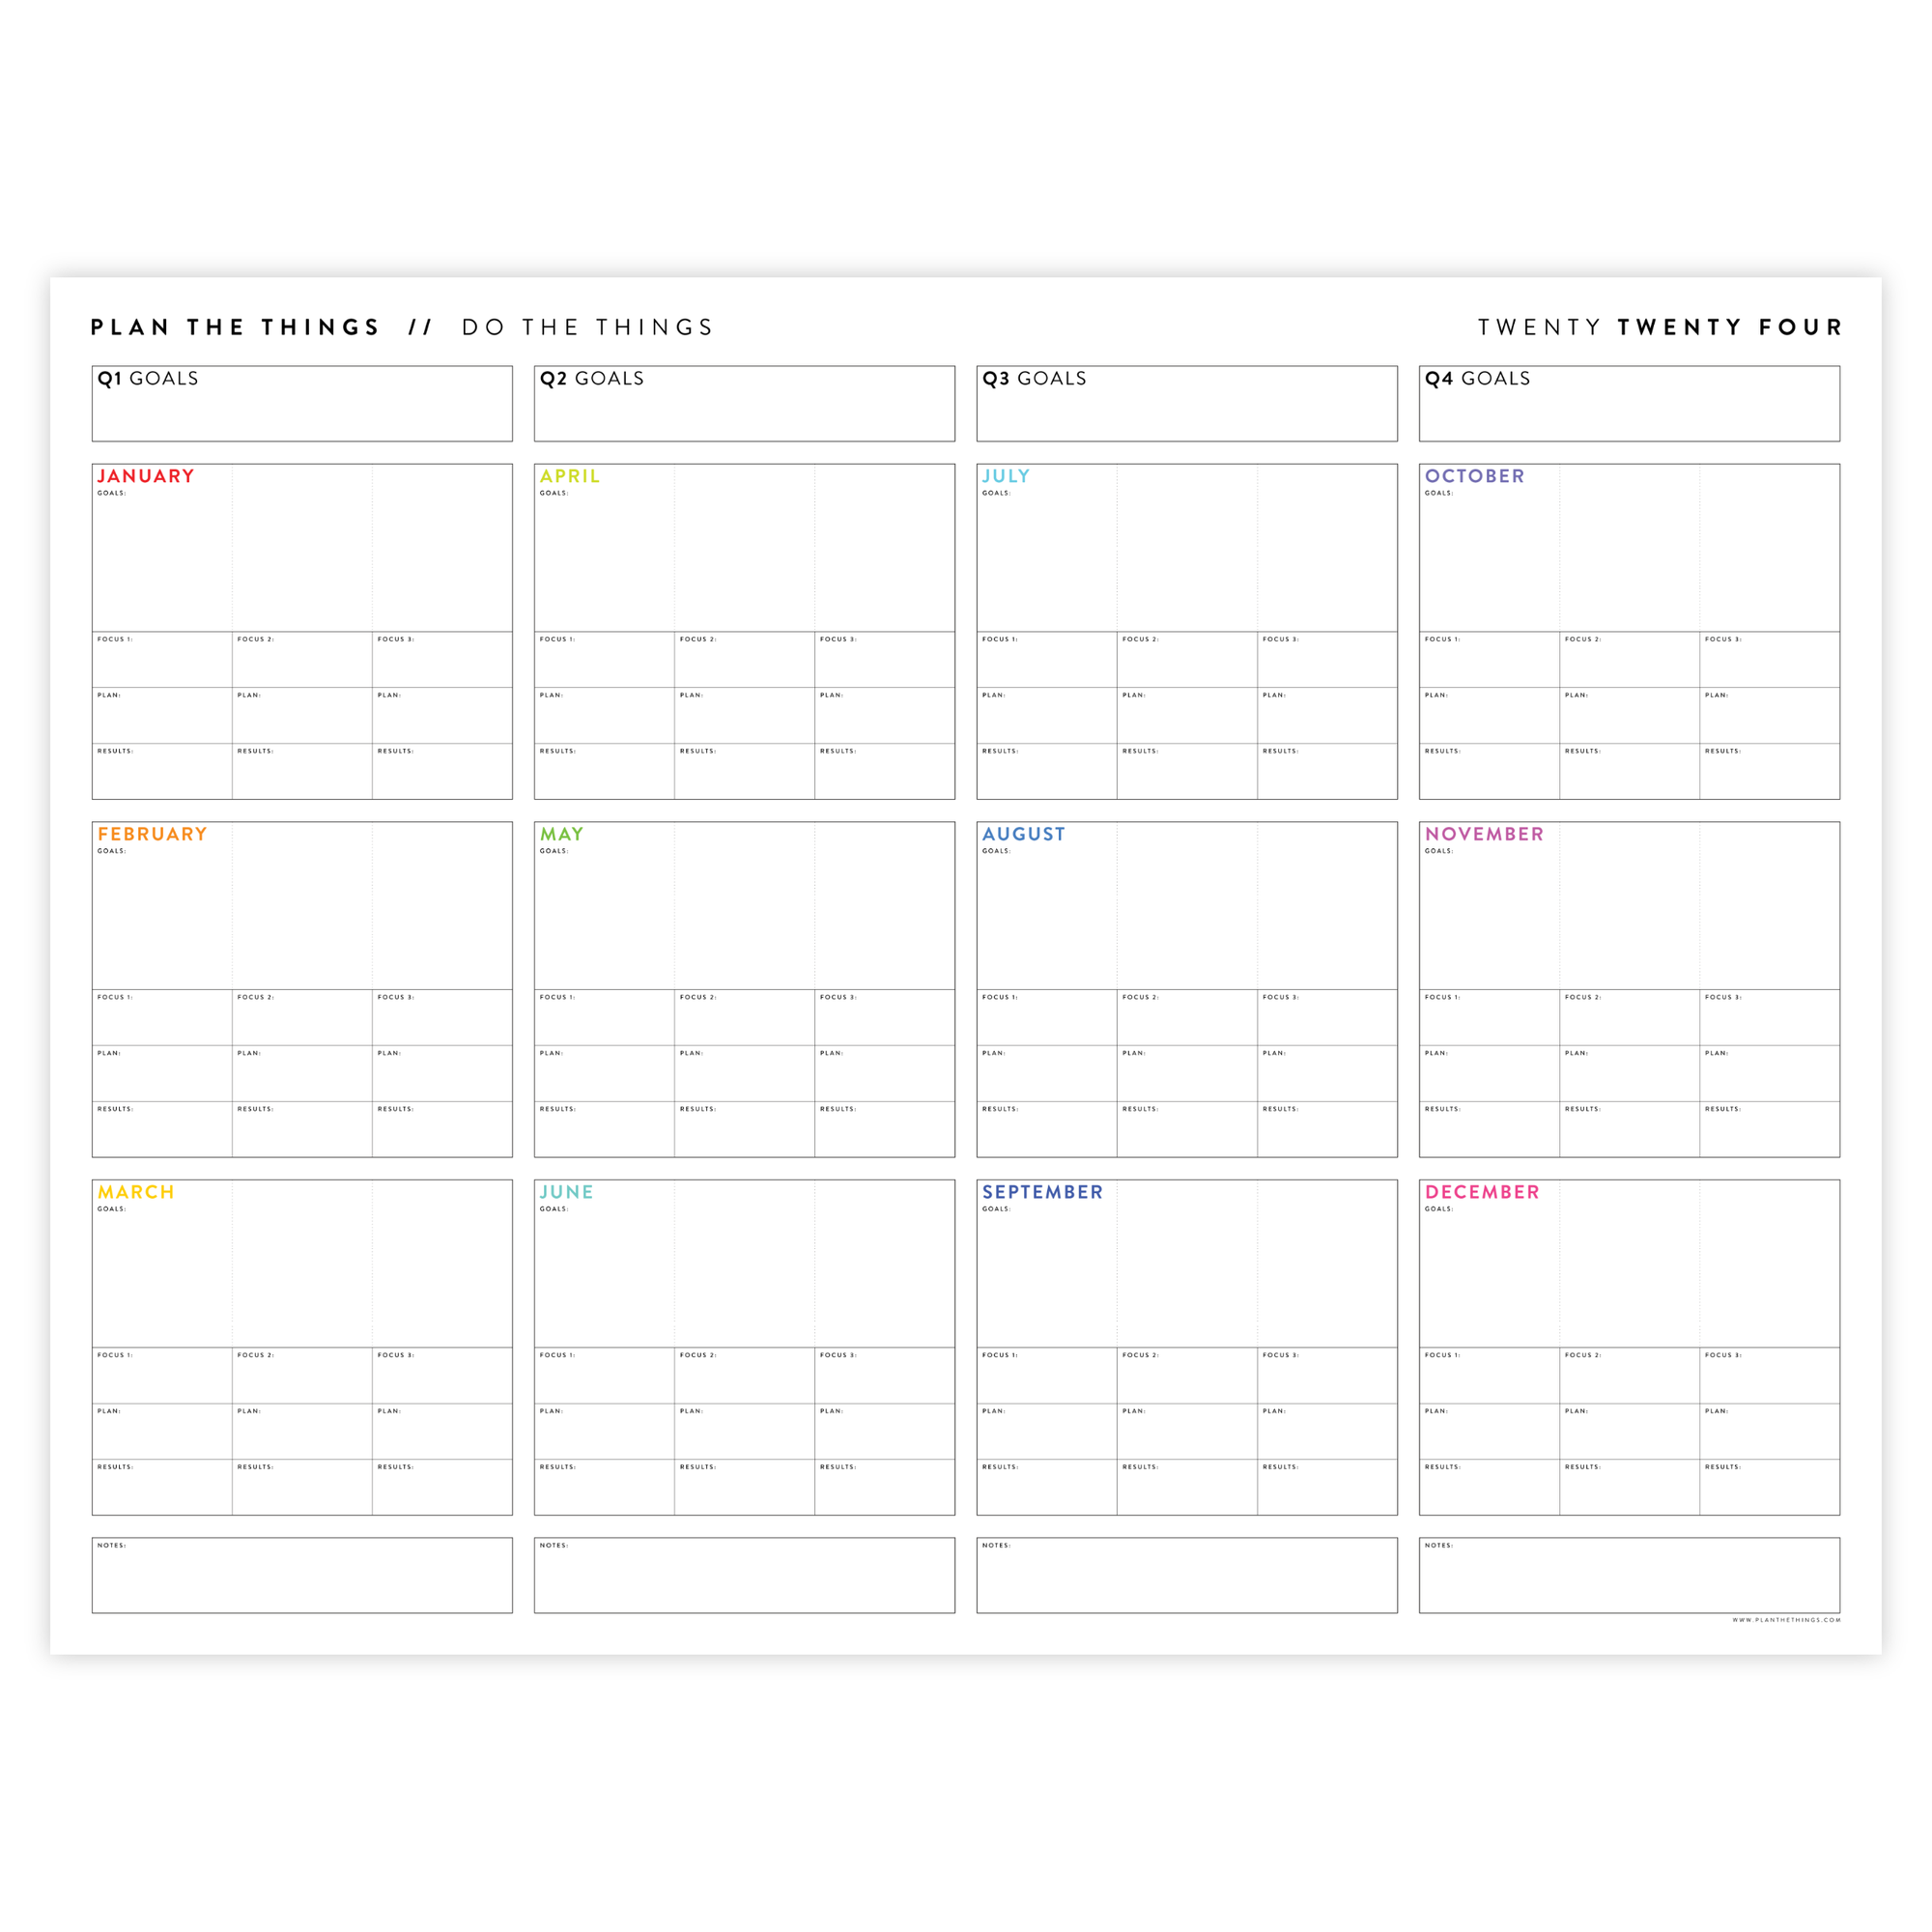 PRINTABLE 2024 FOCUS AND GOALS ANNUAL WALL PLANNER (RAINBOW TEXT) - INSTANT DOWNLOAD